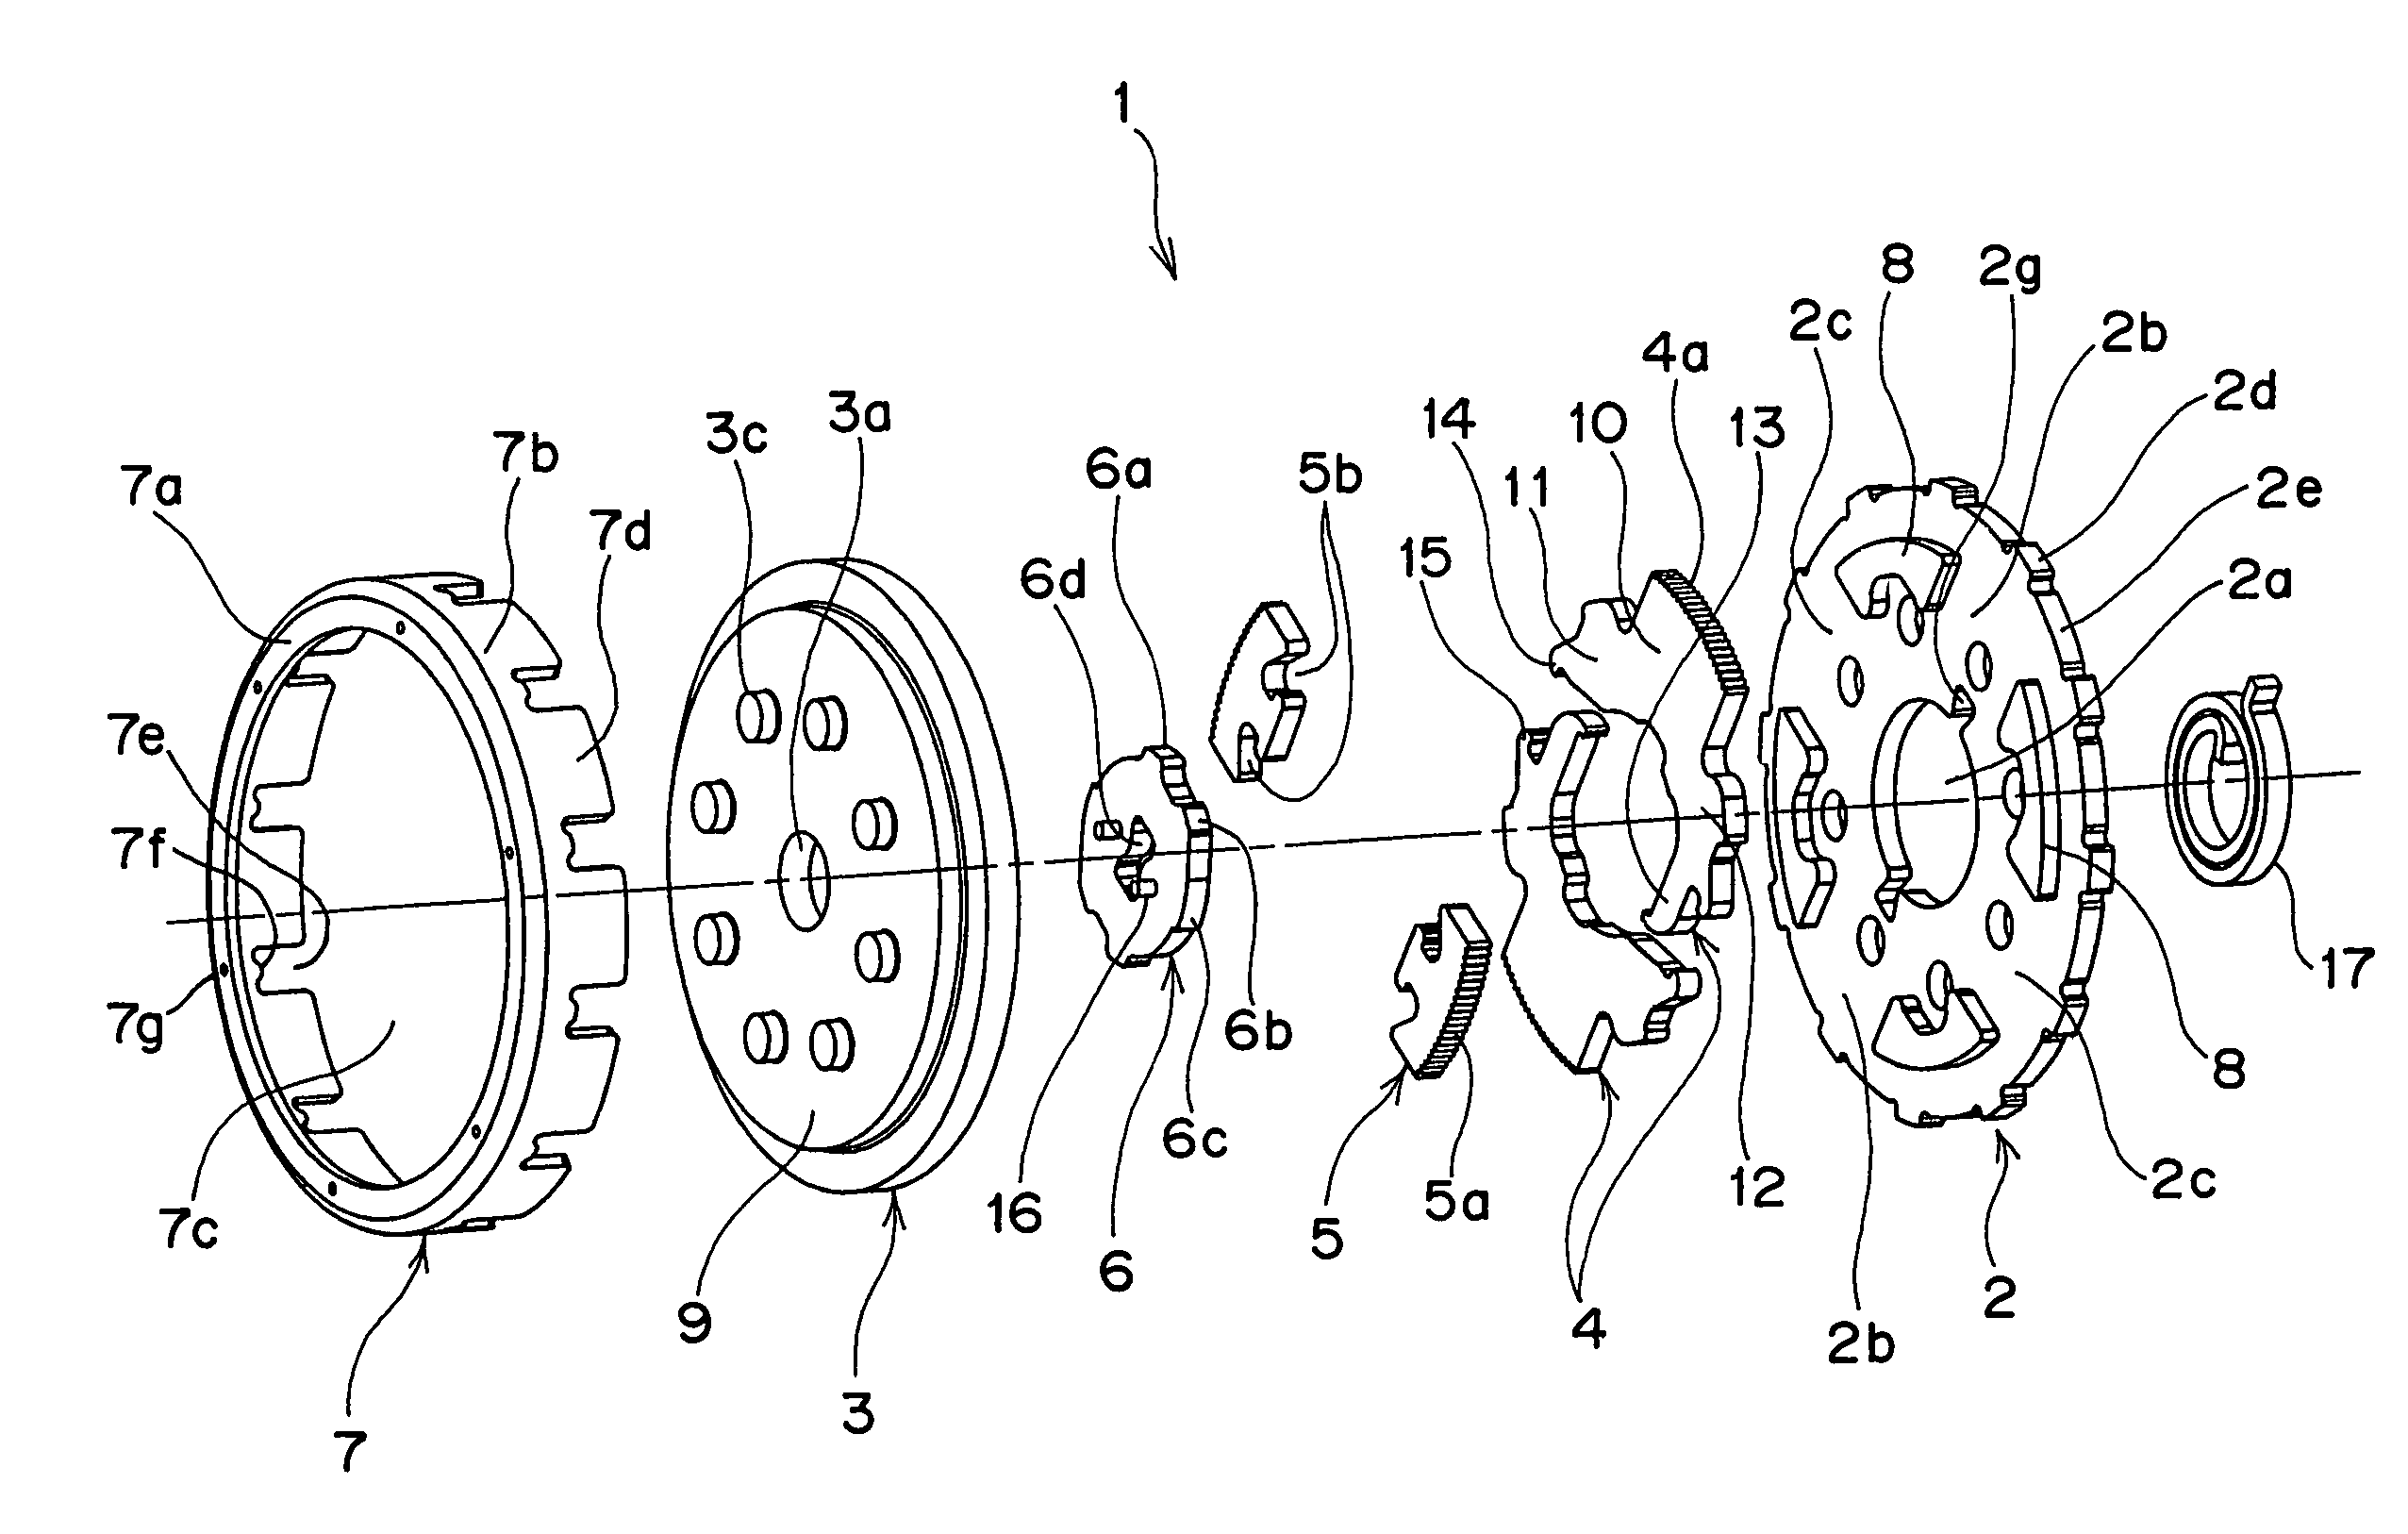 Recliner adjuster having main and auxiliary lock gears